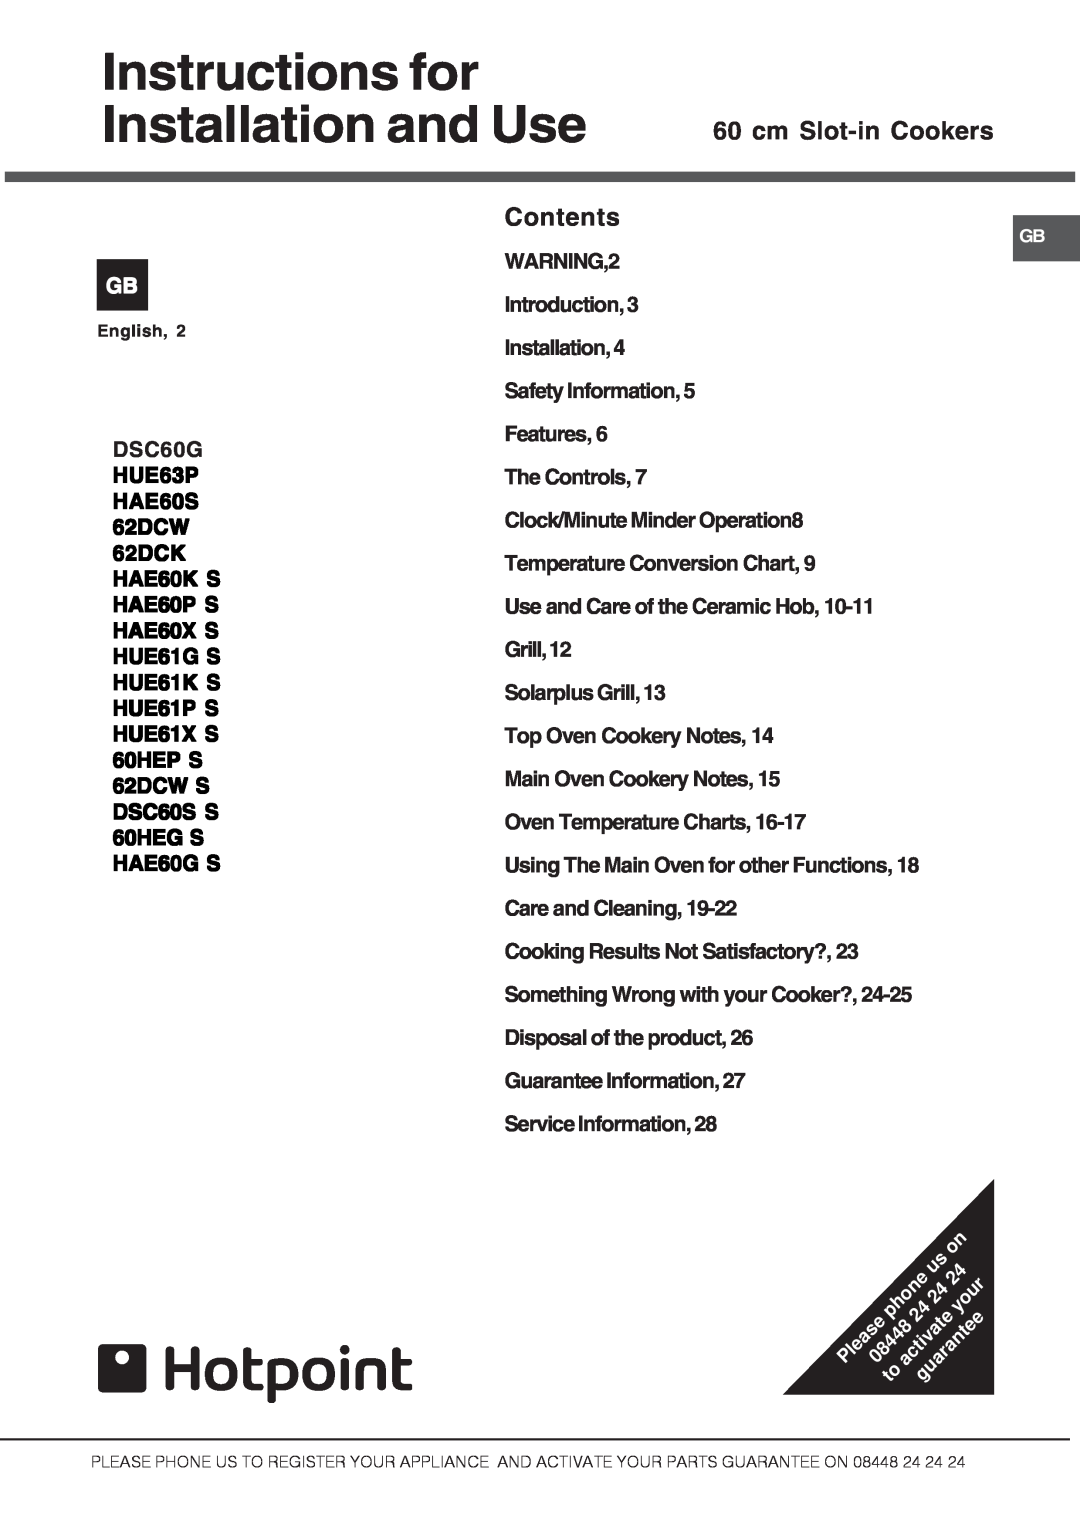 Hotpoint DSC60G manual Instructions for Installation and Use, cm Slot-inCookers, Contents, HUE63P HAE60S 62DCW 